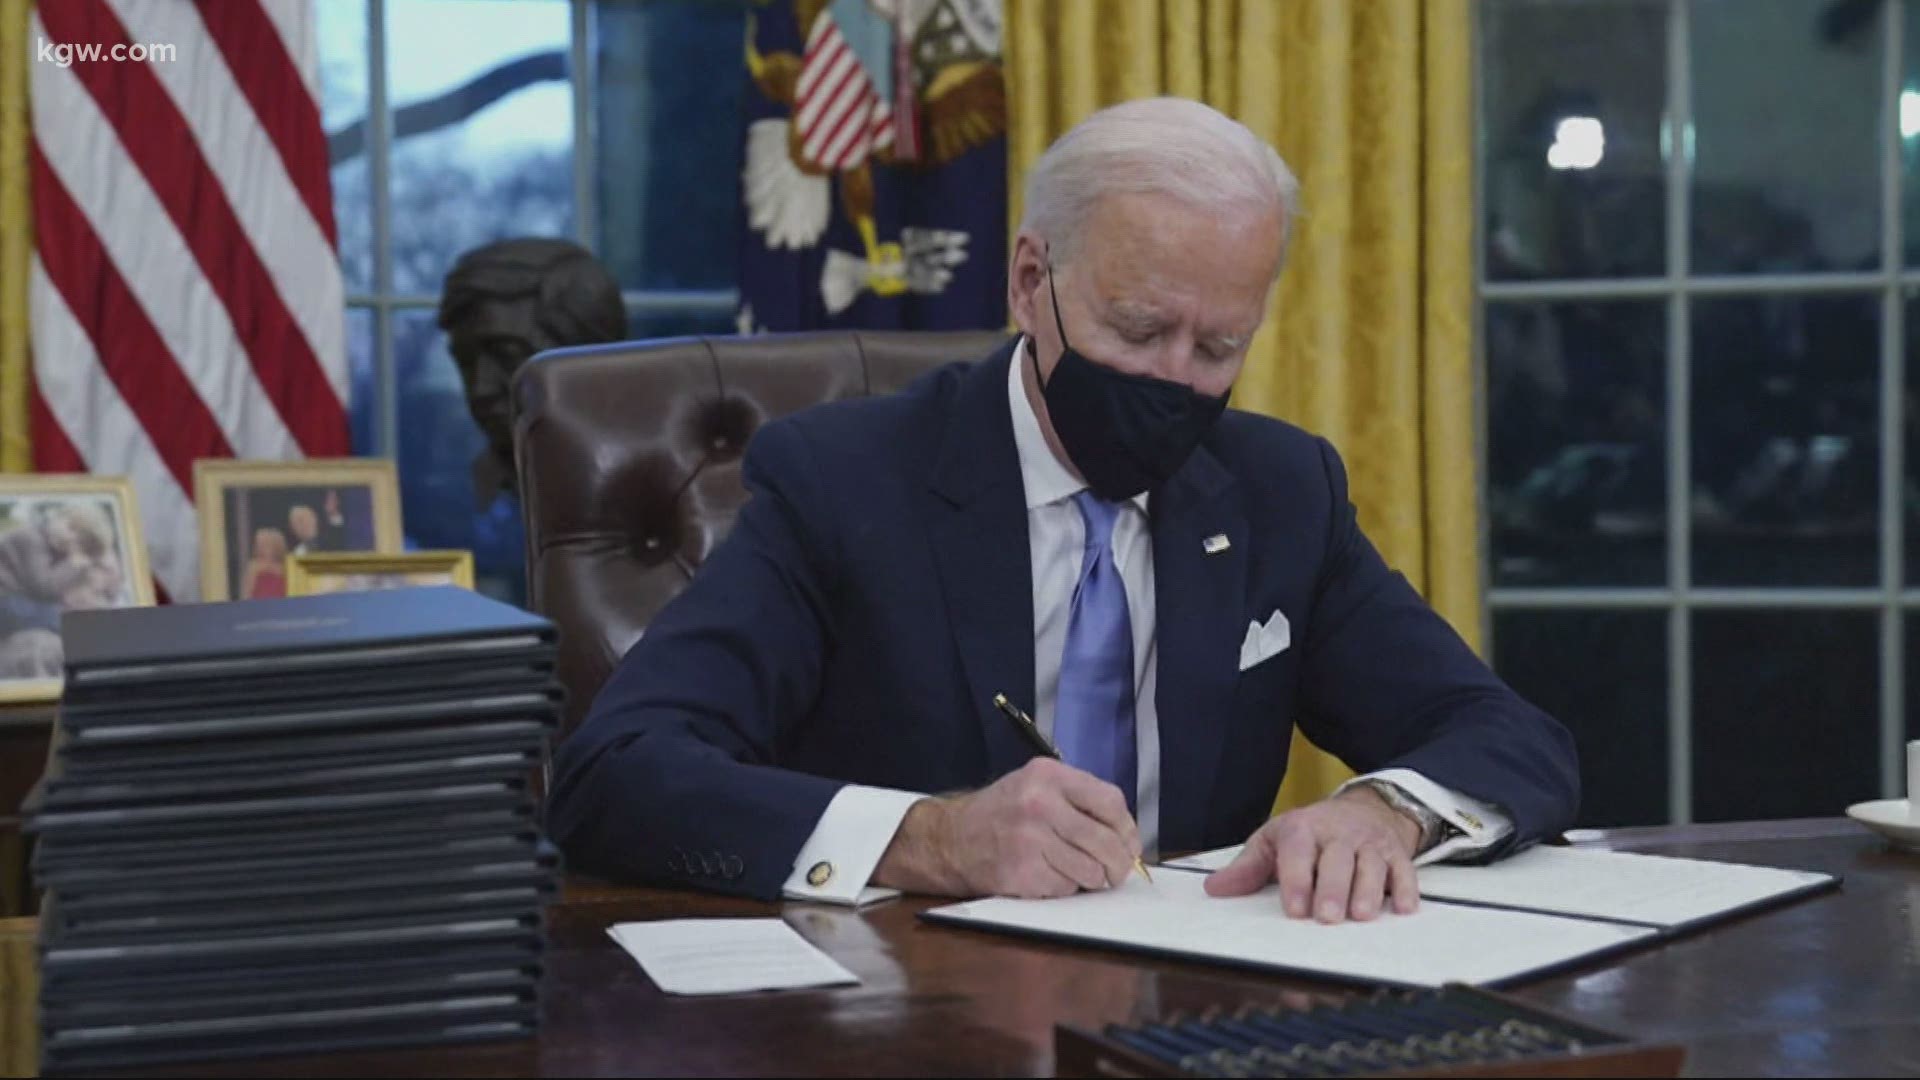 President Biden signed 17 executive orders, including two addressing climate change. Devon Haskins spoke with an environmental advocacy group about the new actions.